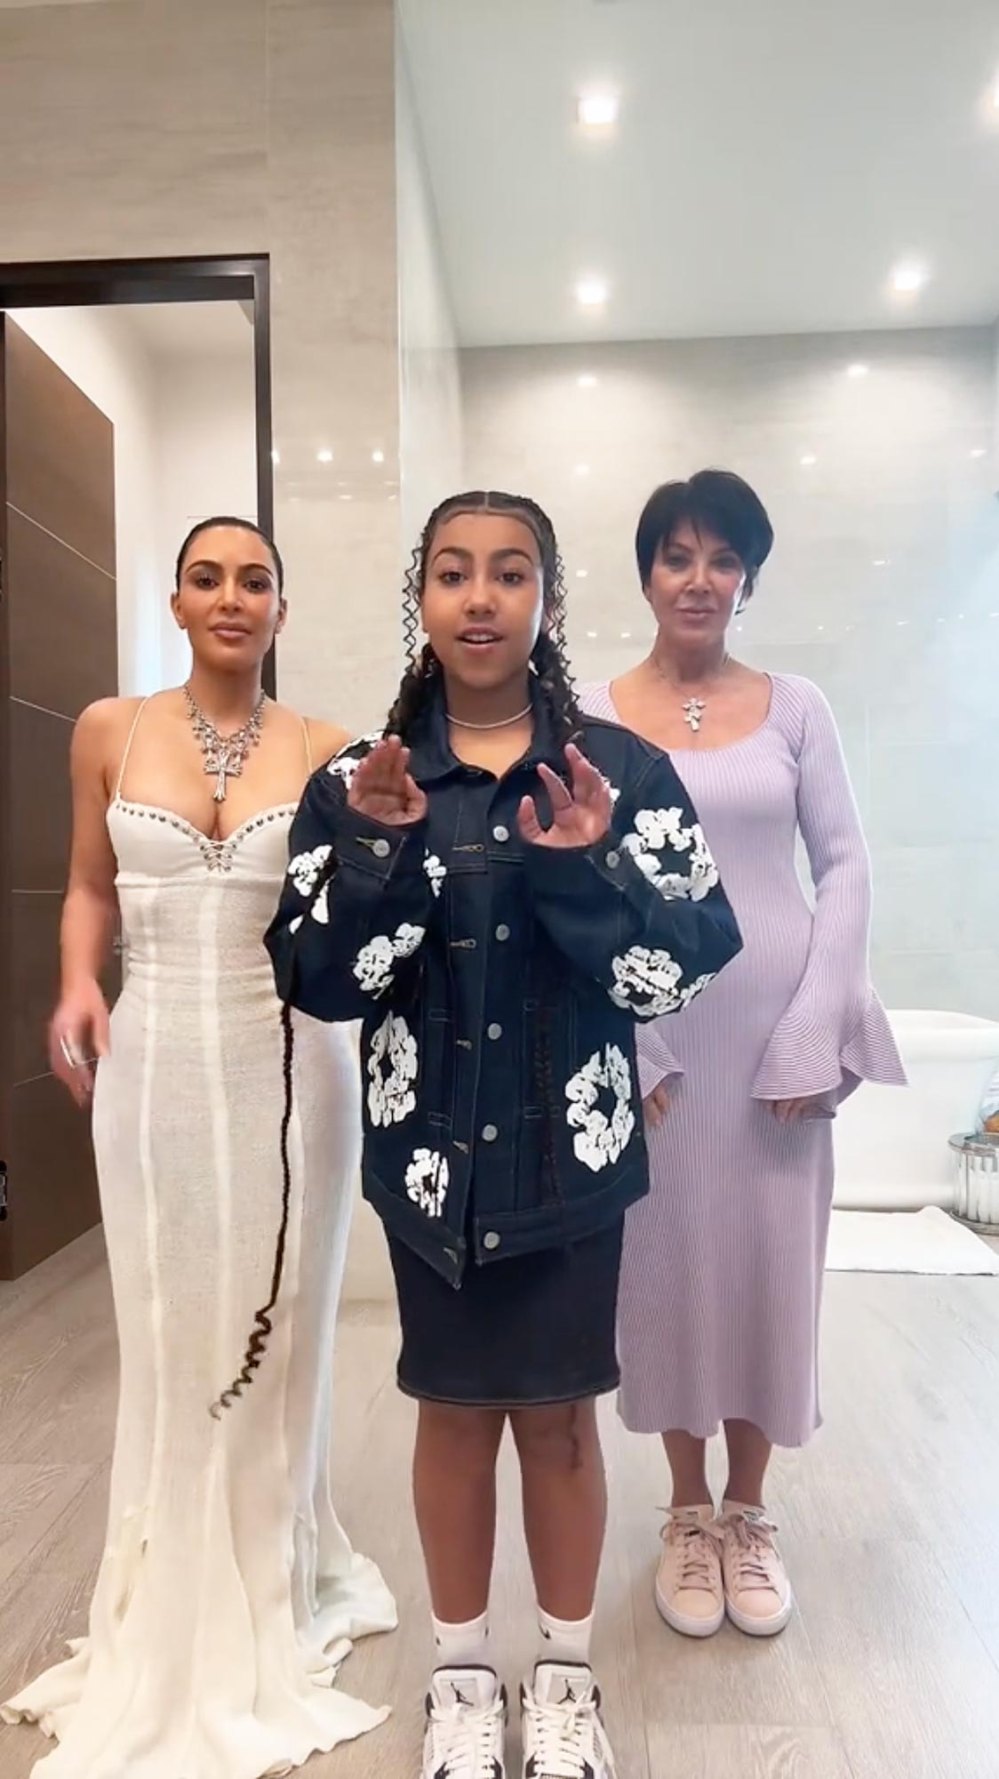 Kim Kardashian North West and Kris Jenner Embrace Easter With Trendy Spring Outfits